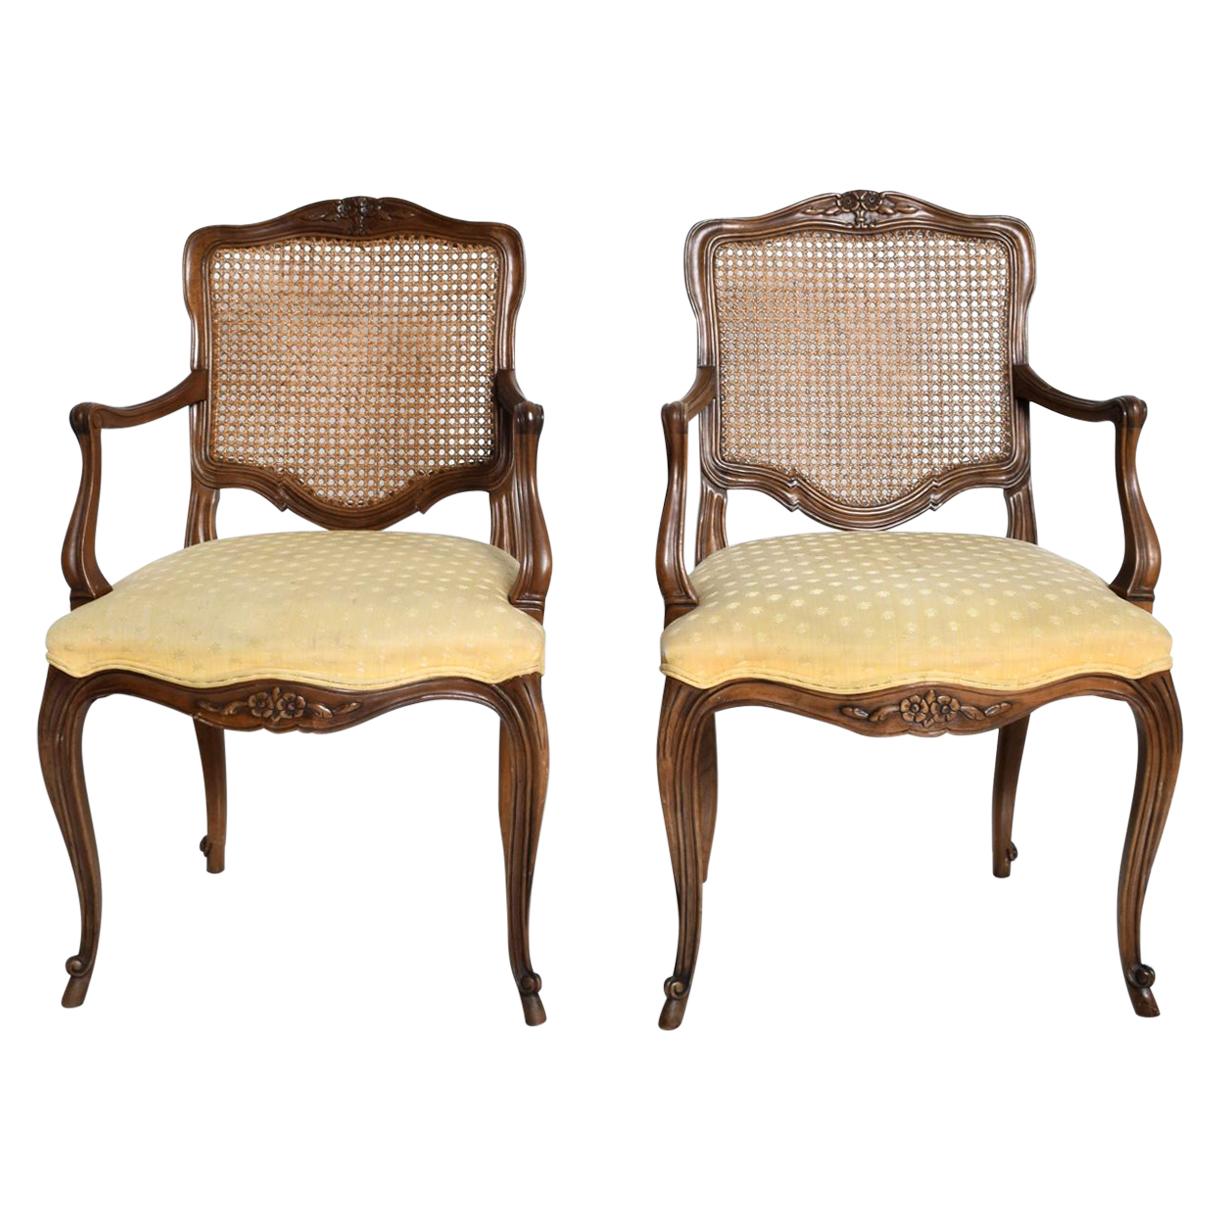 1960s USA Pair of Regency Armchairs by Kindel Furniture of Grand Rapids Michigan
Refined appearance. Lovely hand carved wood. Original golden yellow silk upholstery. Woven Cane back.
Chair retains original label.
34.5 H x 21D x 21 W x 19.5 Seat